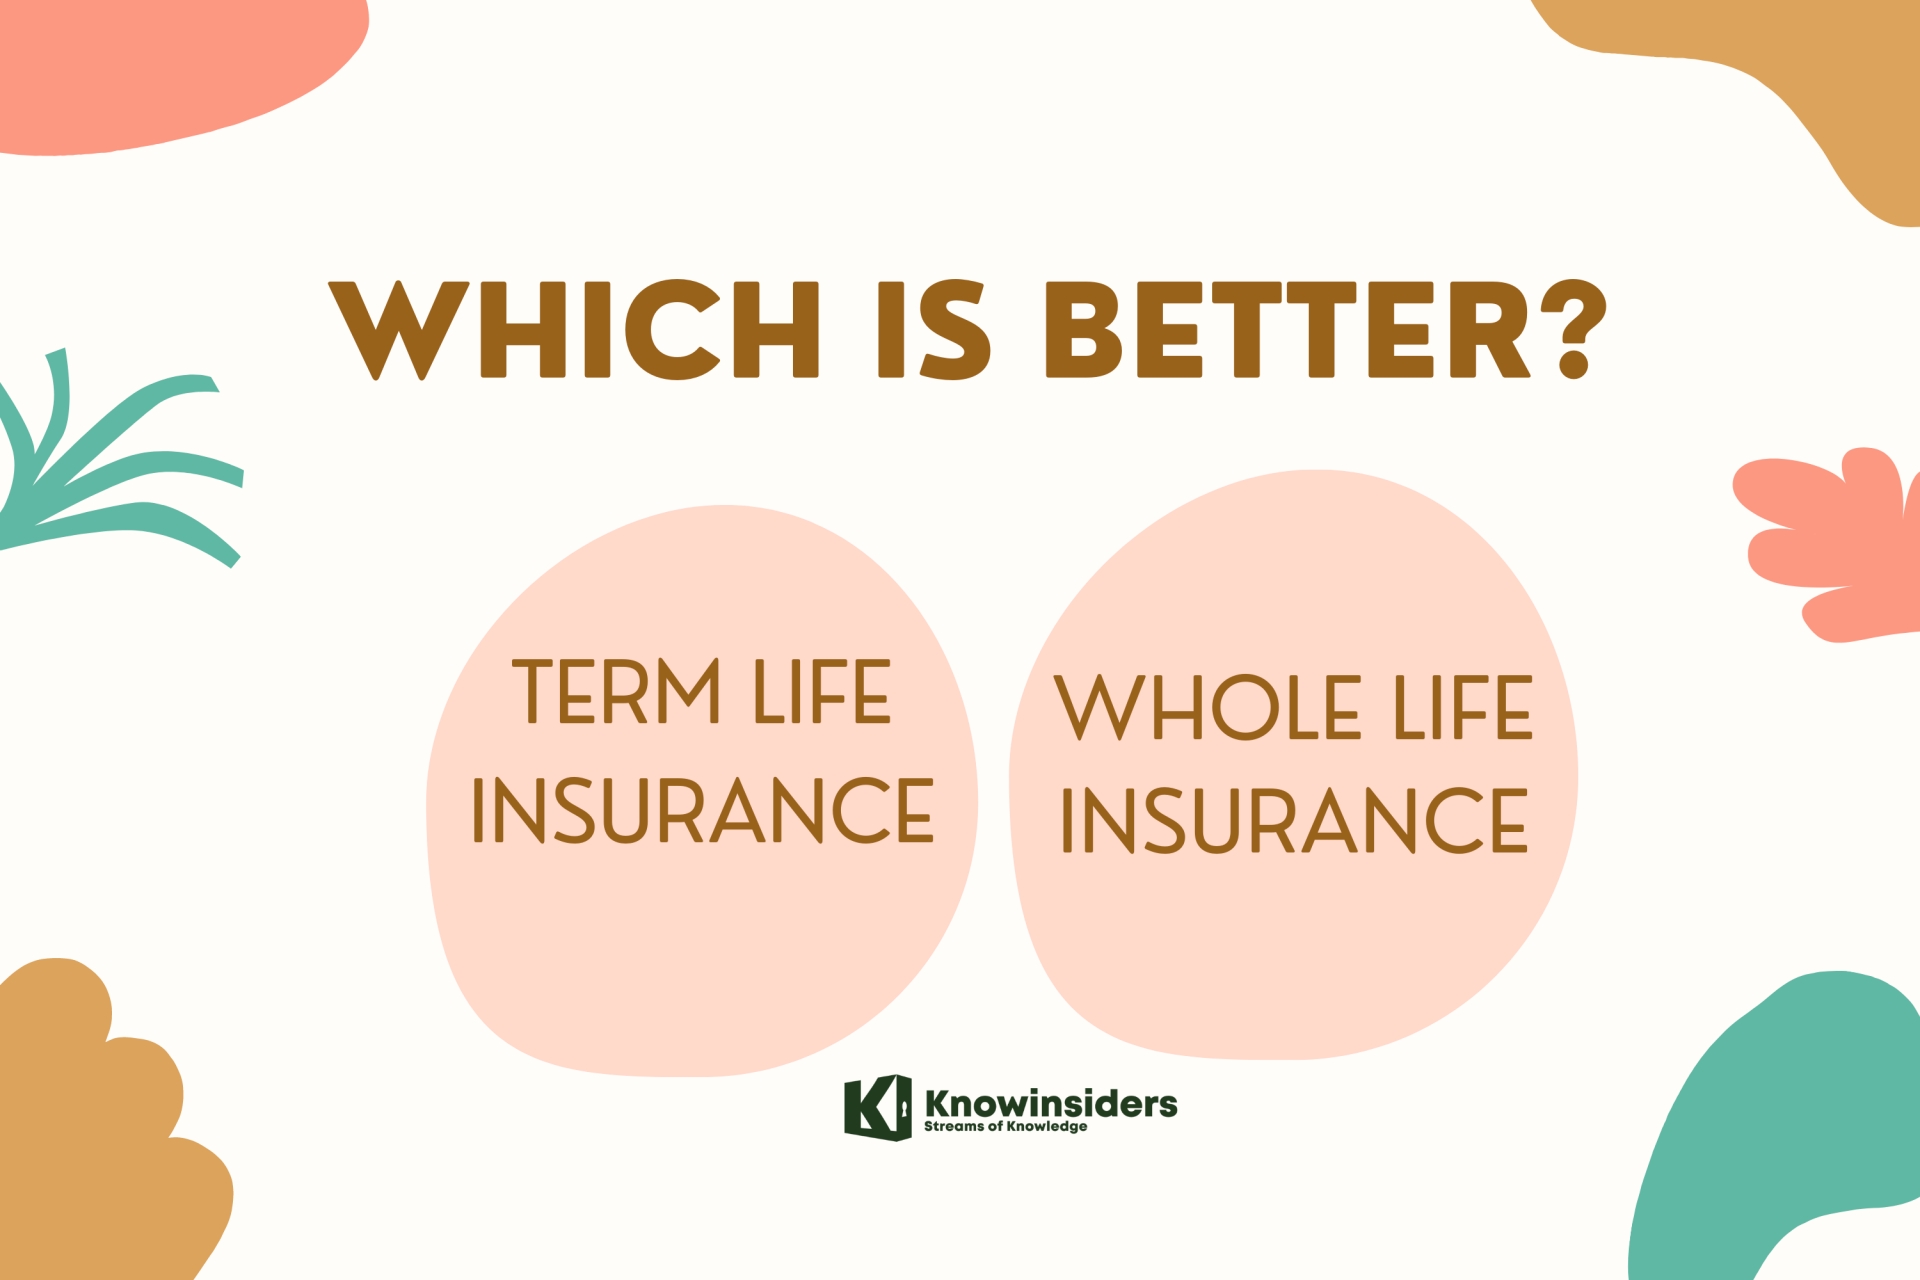 What Is Better: Term Life or Whole Life Insurance